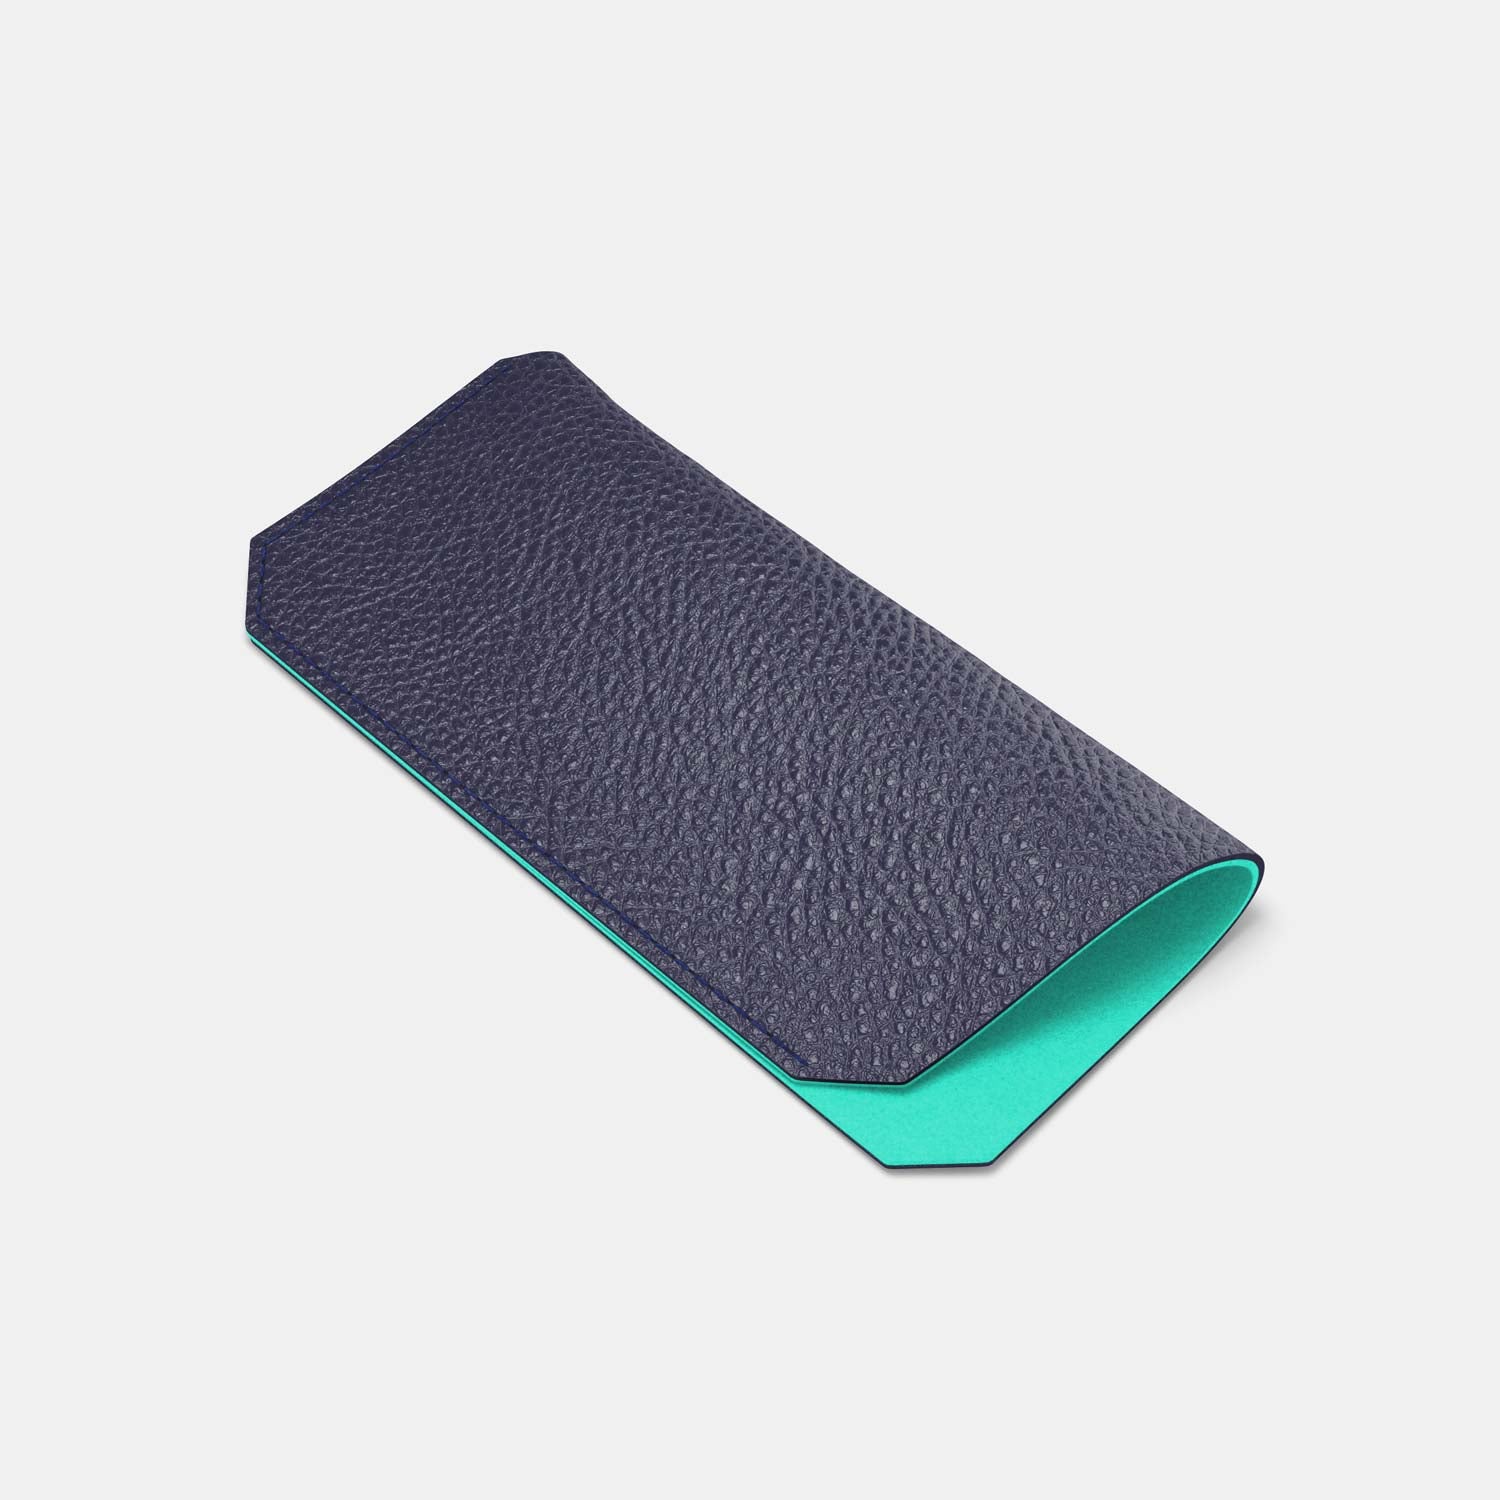 Leather Sunglasses Case - Navy Blue and Mint - RYAN London